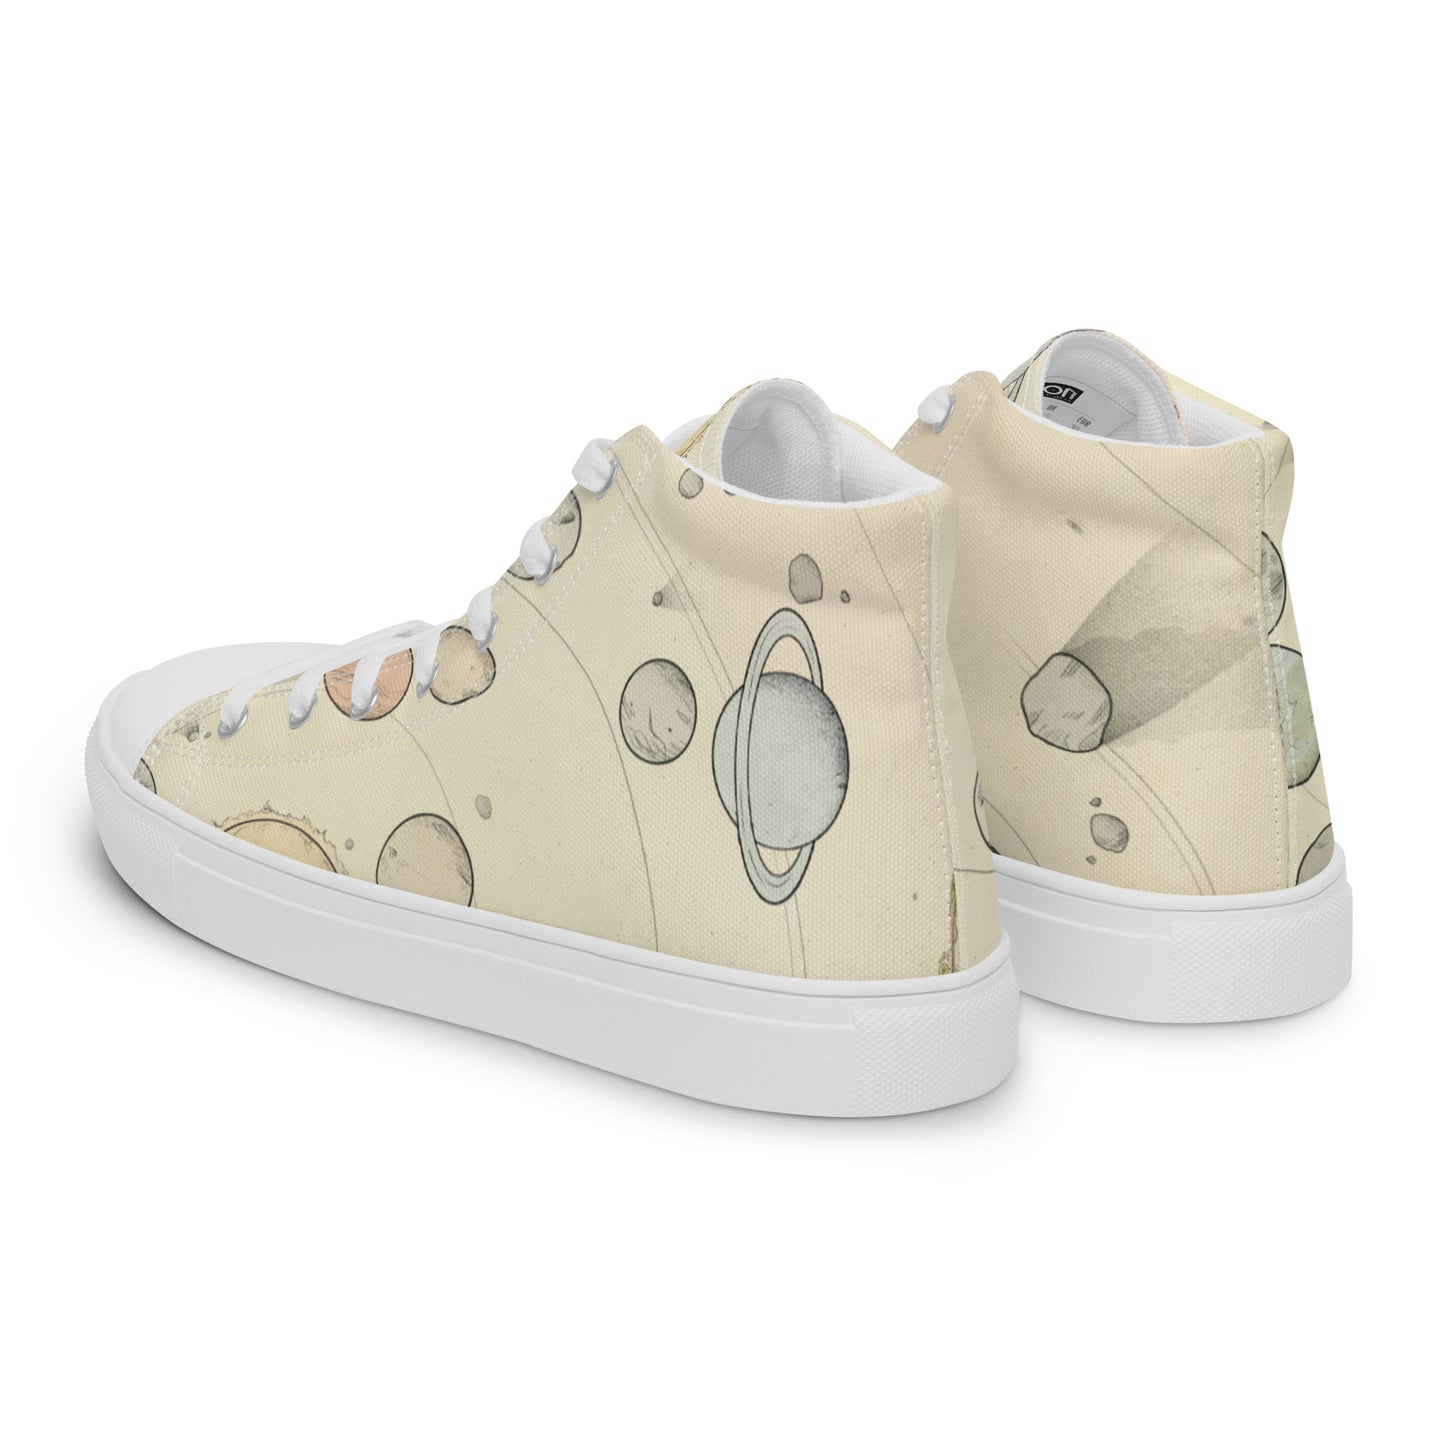 Stegegets Men's High Top Canvas Shoes - Rear left view of both shoes